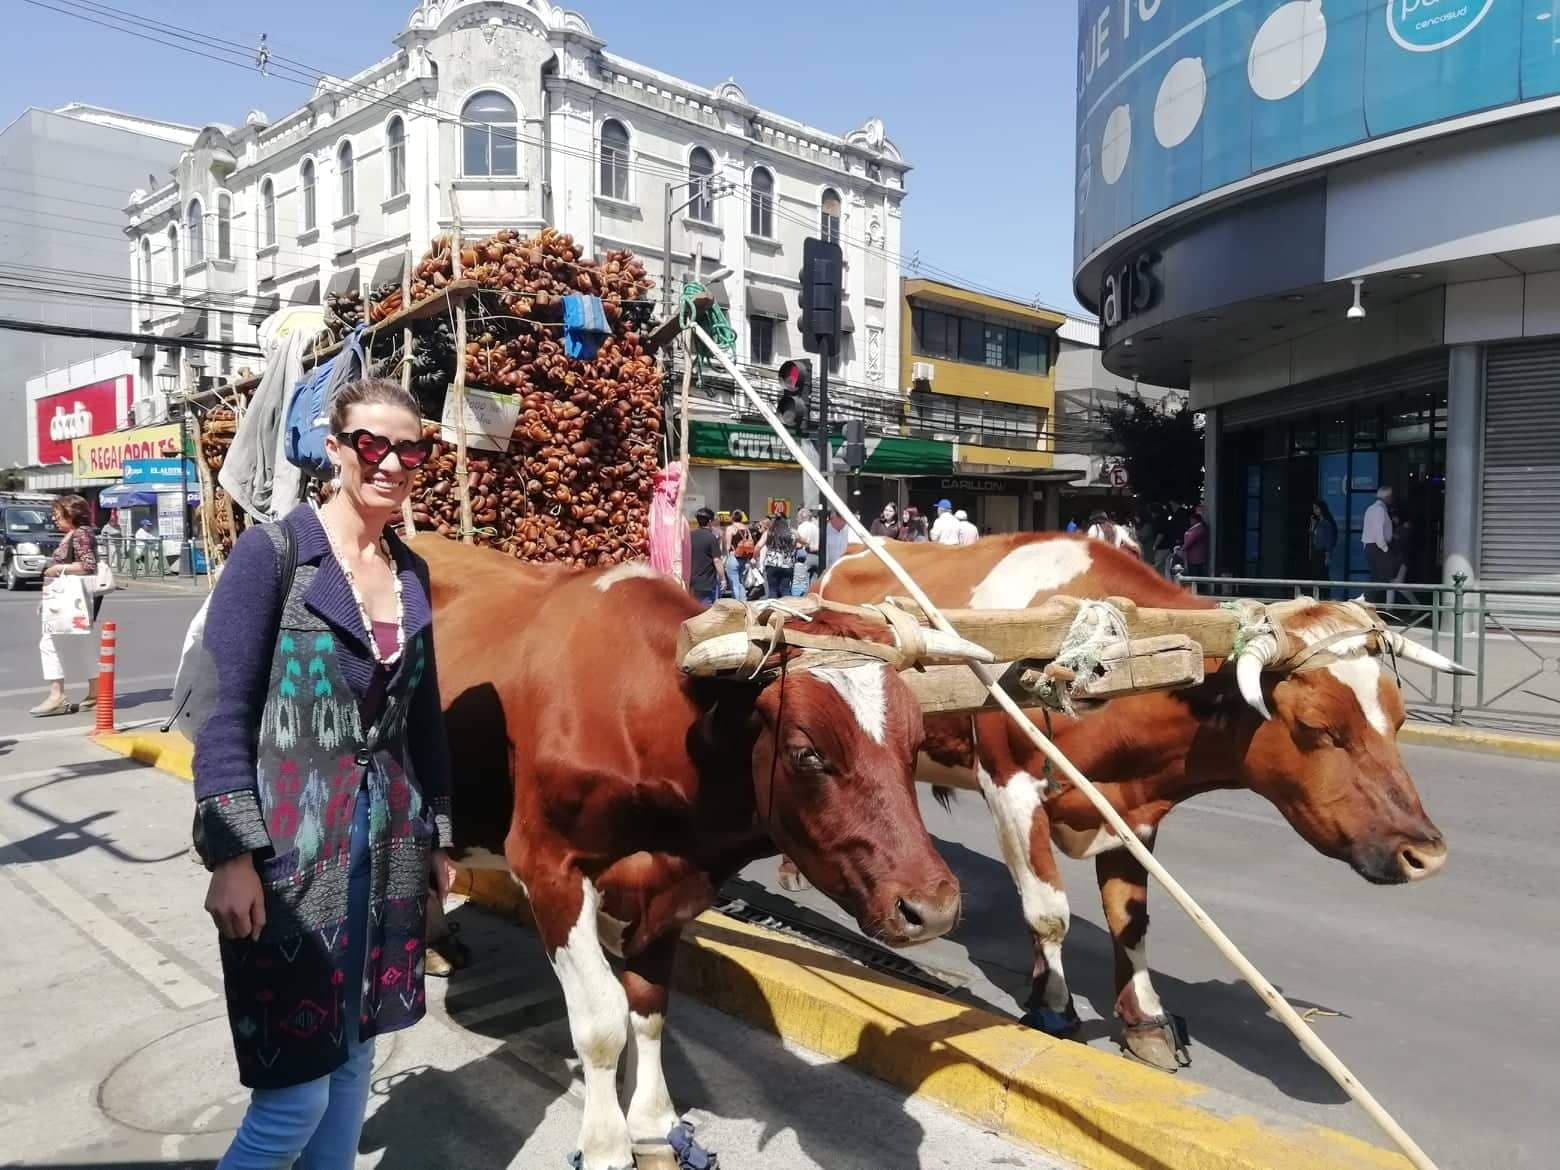 Film producer Lyndsay Urquhart in a city street in Chile, against a backgrop of historic buildings. She stands next to a bullock-drawn cart.